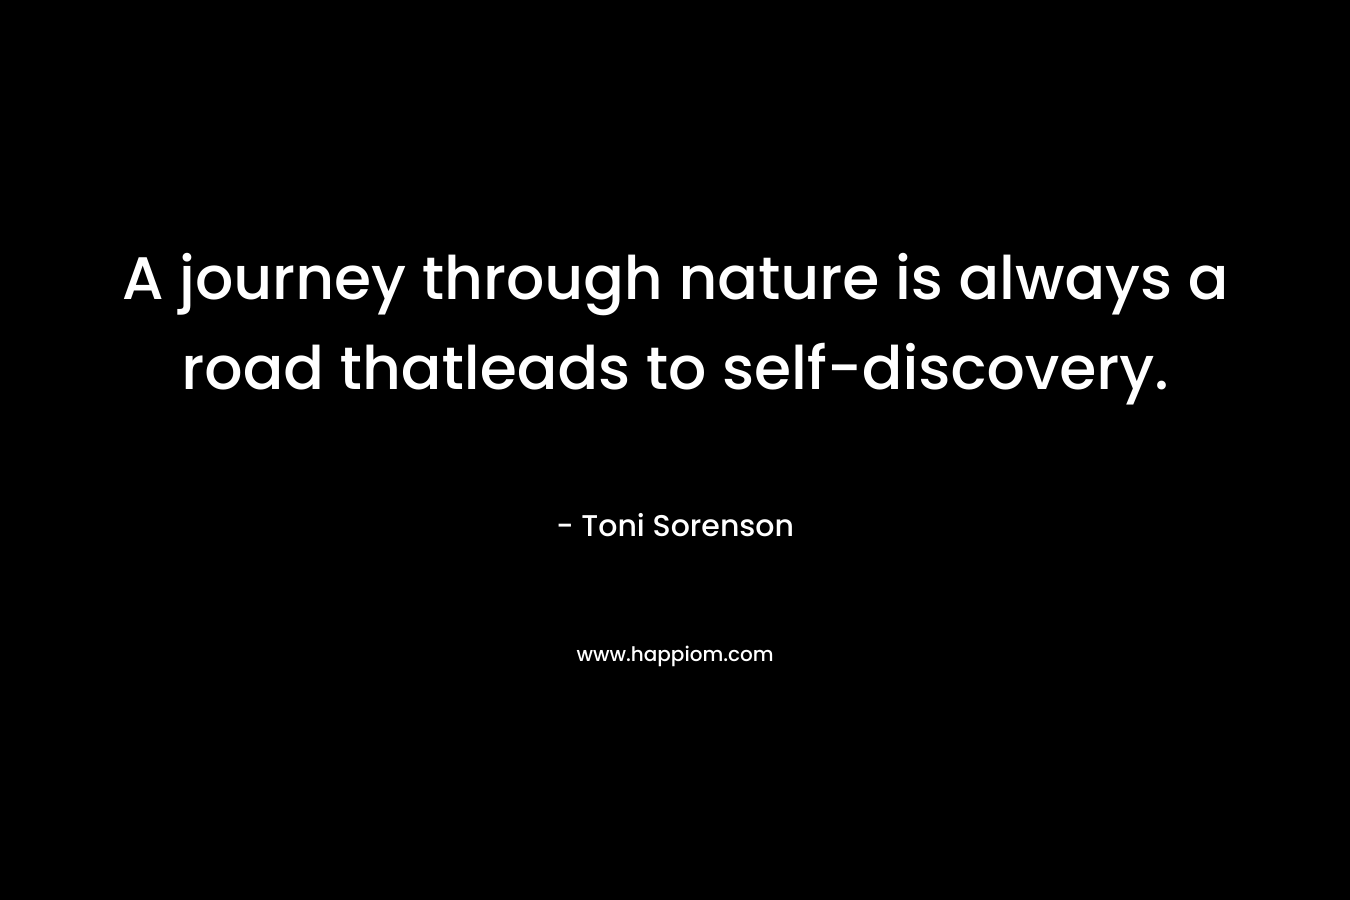 A journey through nature is always a road thatleads to self-discovery. – Toni Sorenson